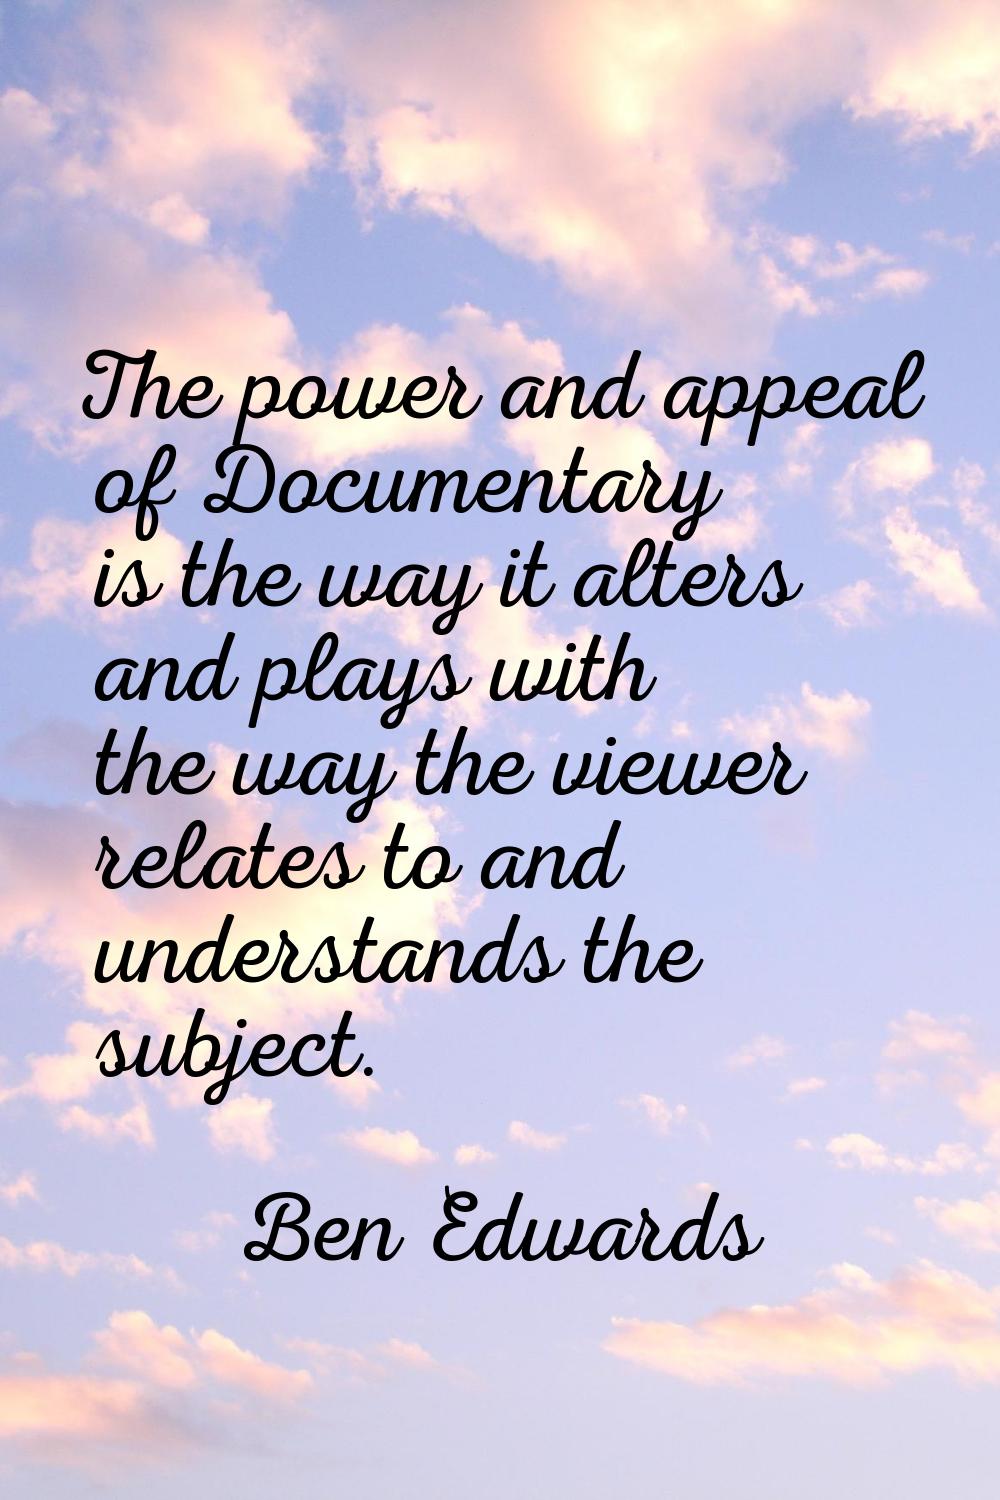 The power and appeal of Documentary is the way it alters and plays with the way the viewer relates 